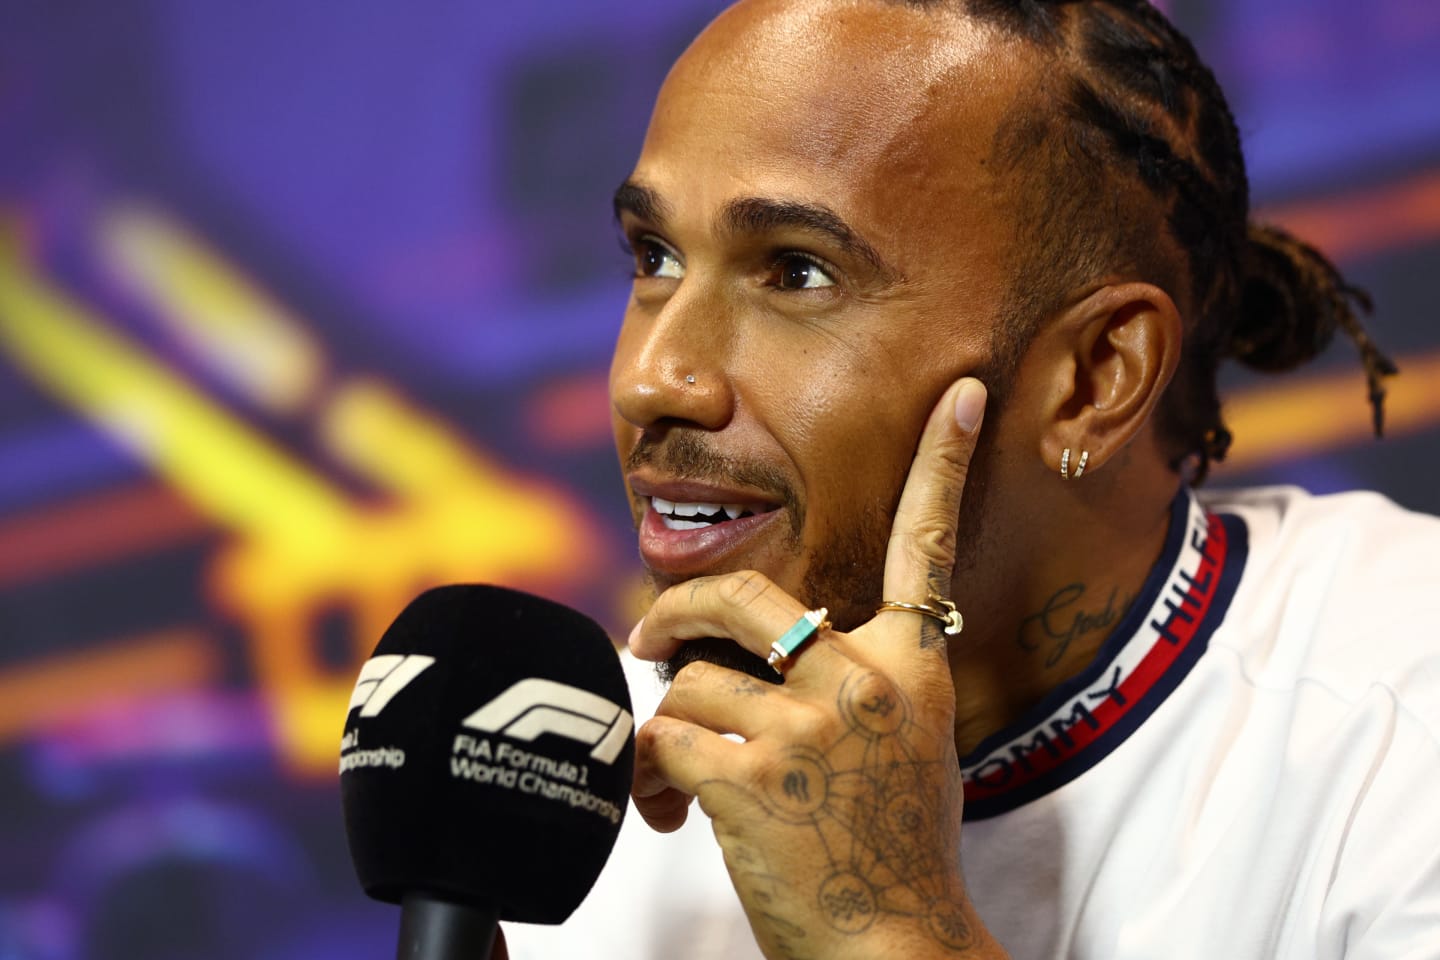 SINGAPORE, SINGAPORE - SEPTEMBER 29: Lewis Hamilton of Great Britain and Mercedes attends the Drivers Press Conference during previews ahead of the F1 Grand Prix of Singapore at Marina Bay Street Circuit on September 29, 2022 in Singapore, Singapore. (Photo by Clive Rose/Getty Images,)